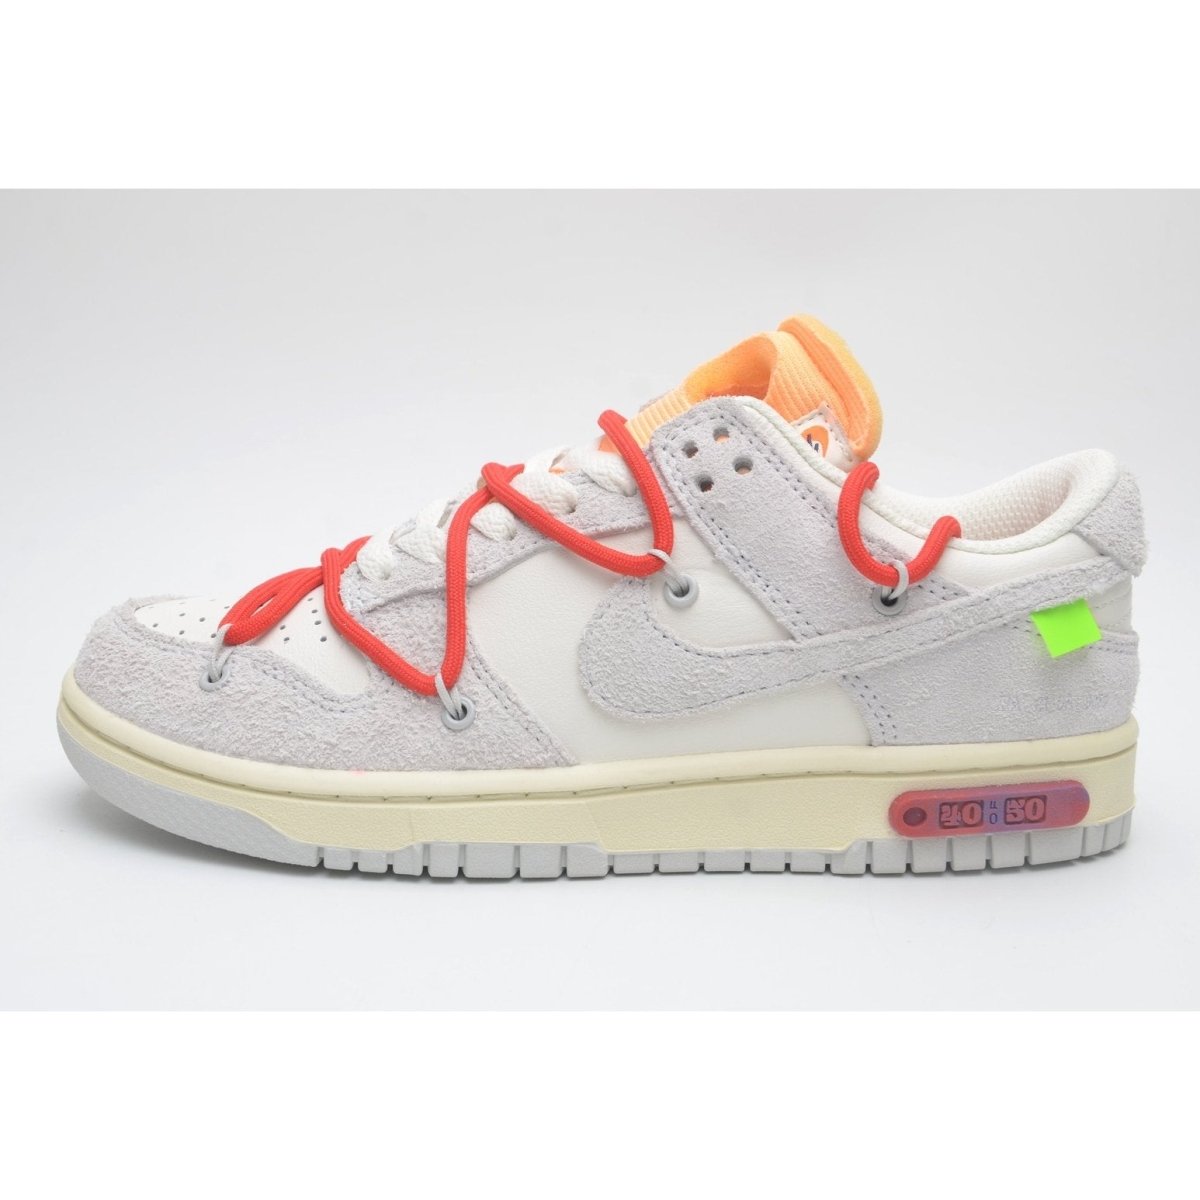 Nike Dunk Low x Off-White Lot 20 of 50 2021 for Sale